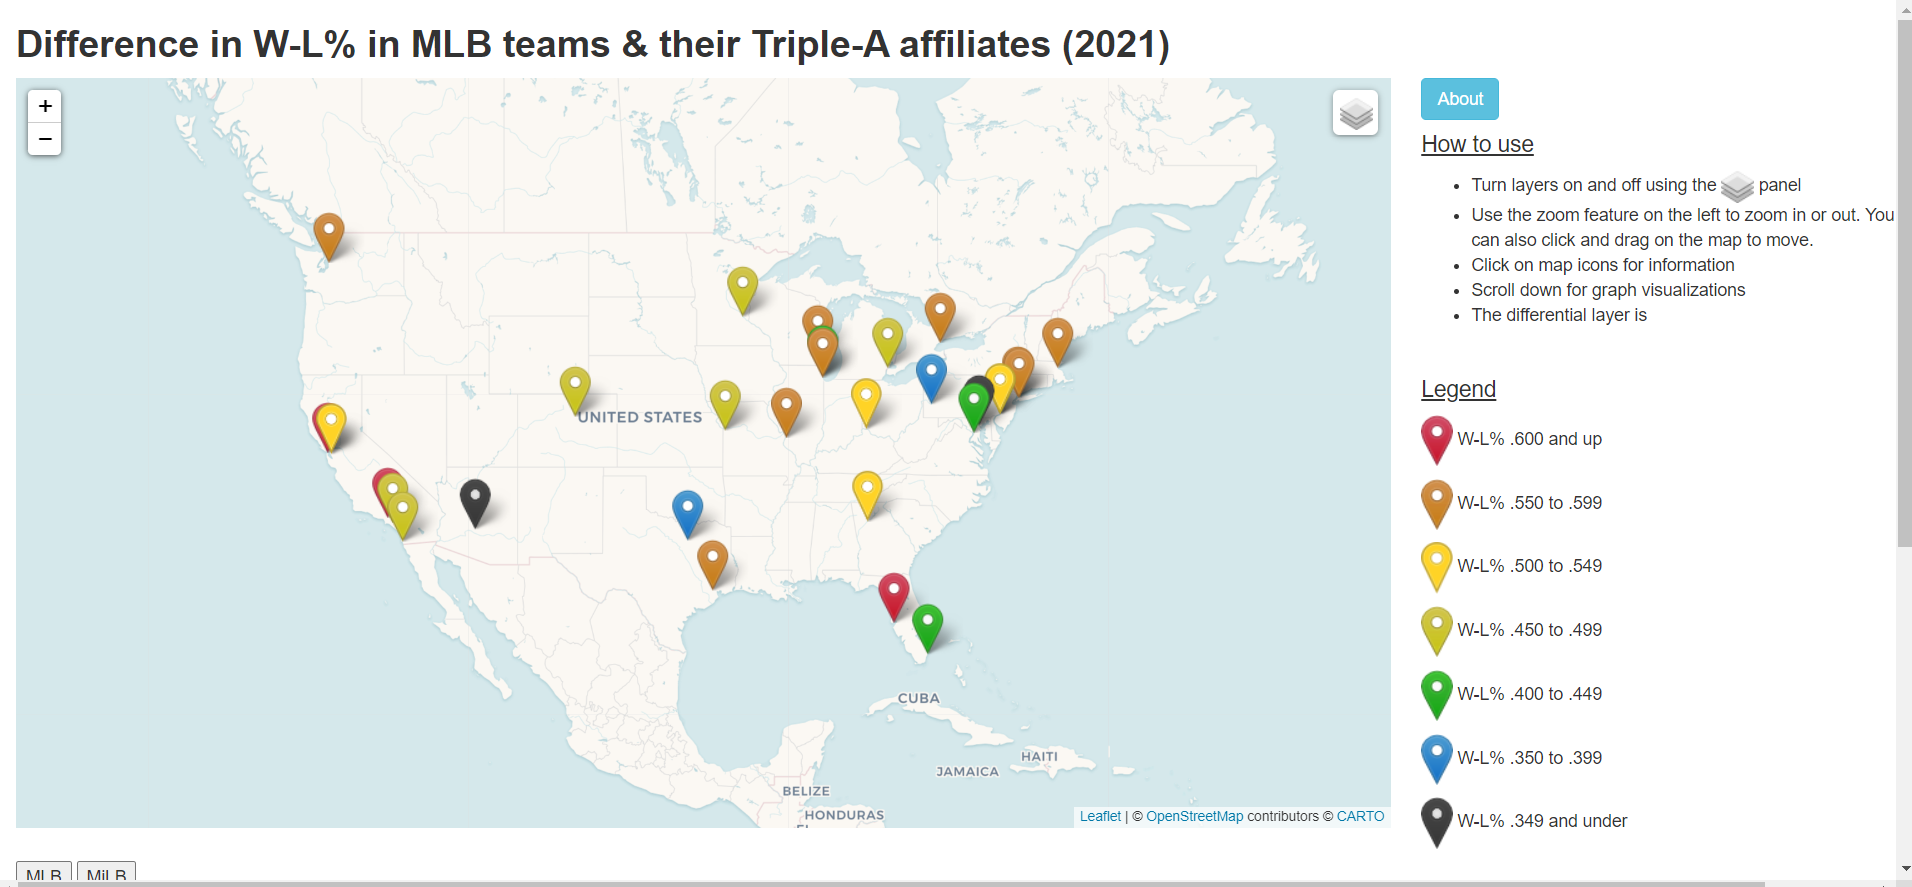 Screenshot of Difference in W-L% in MLB teams and their Triple-A affiliates map